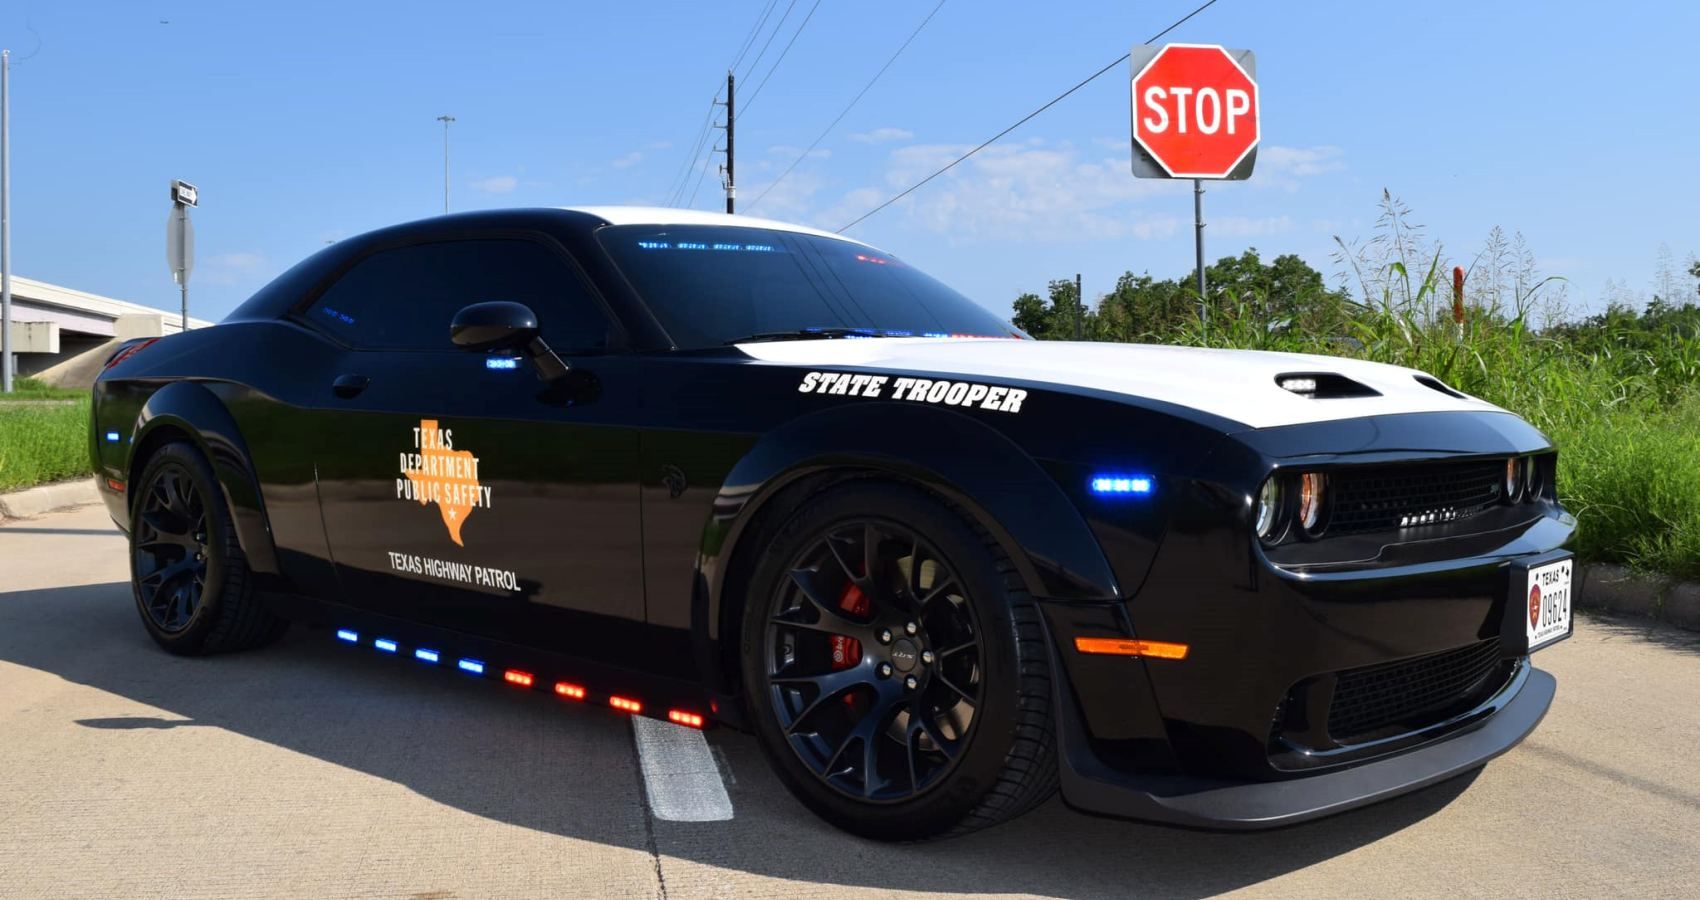 Texas State Troopers' 1080 HP Challenger SRT Hellcat Makes Lawbreakers Shiver